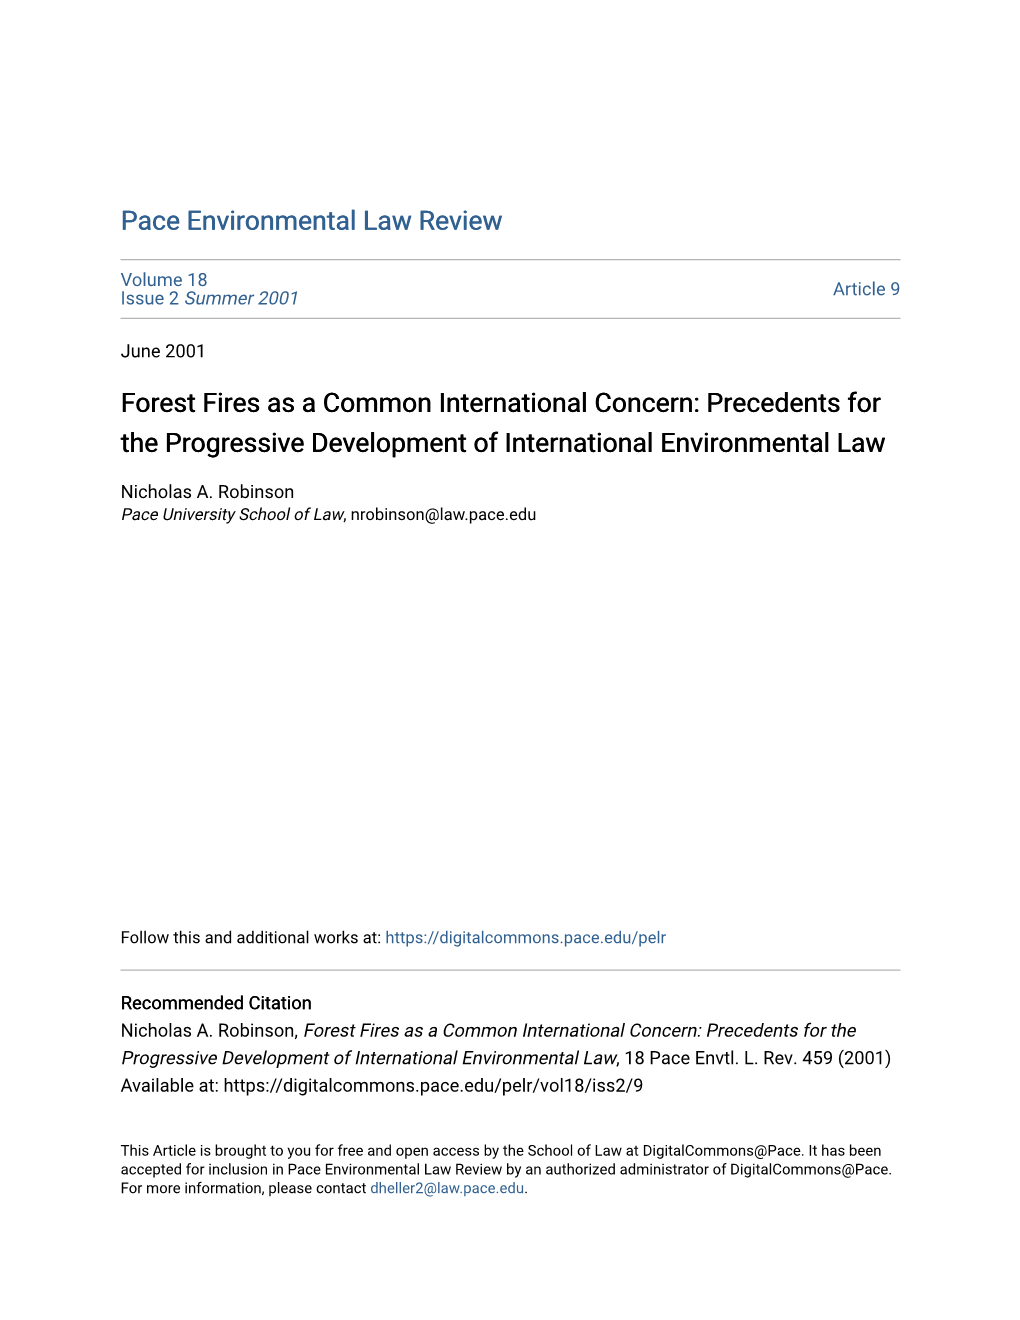 Forest Fires As a Common International Concern: Precedents for the Progressive Development of International Environmental Law